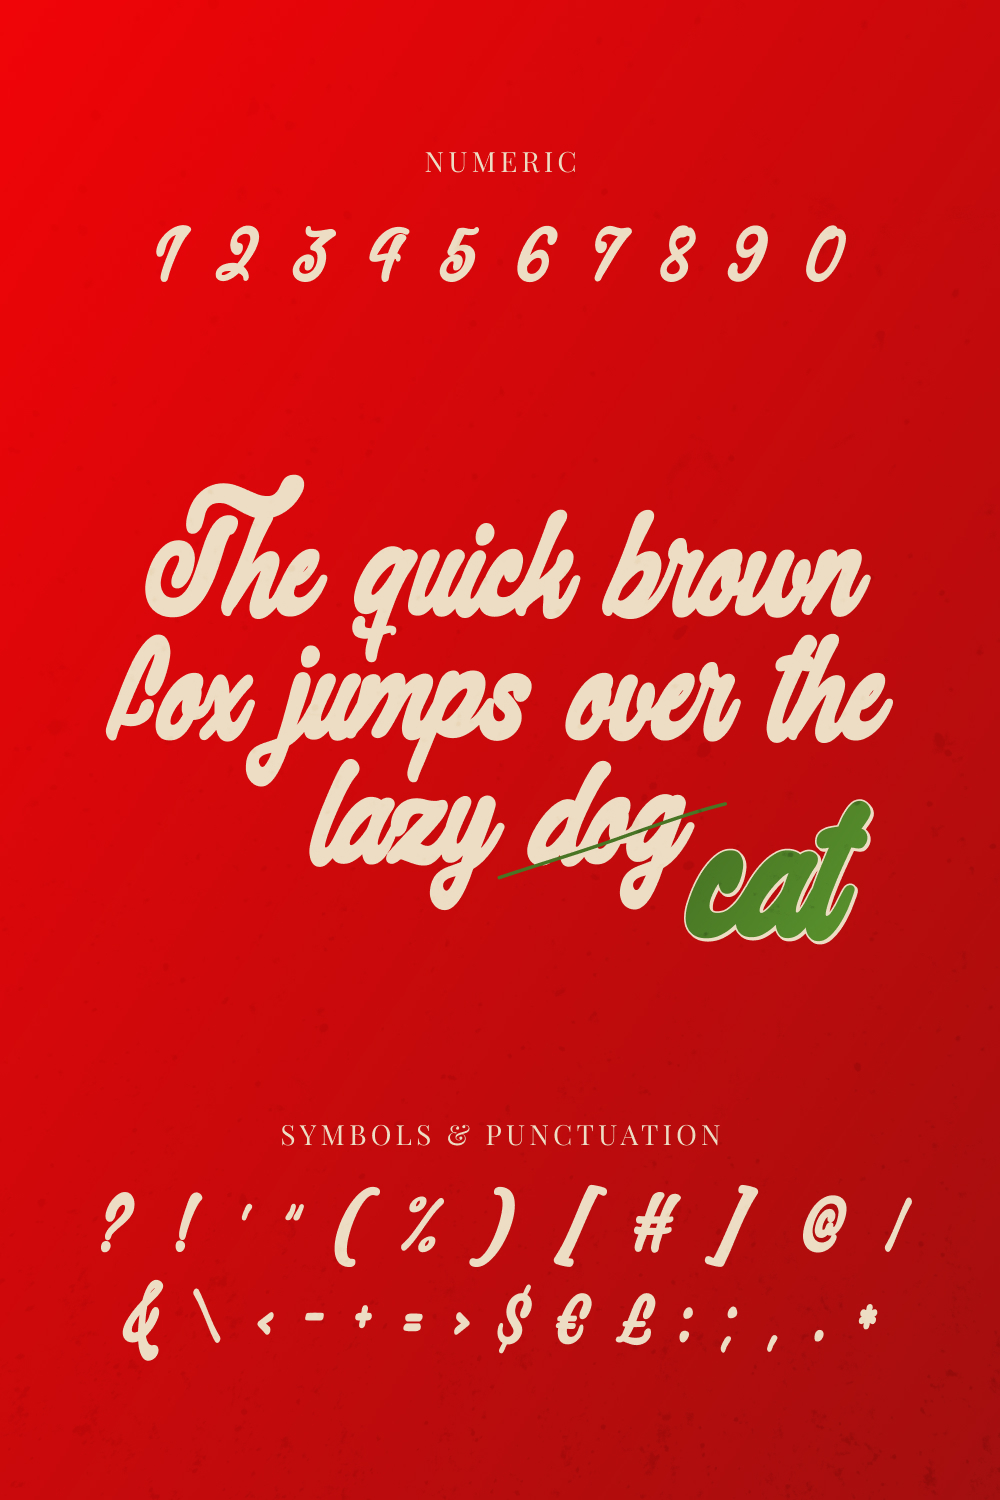 Beautiful white font on the classic red background.